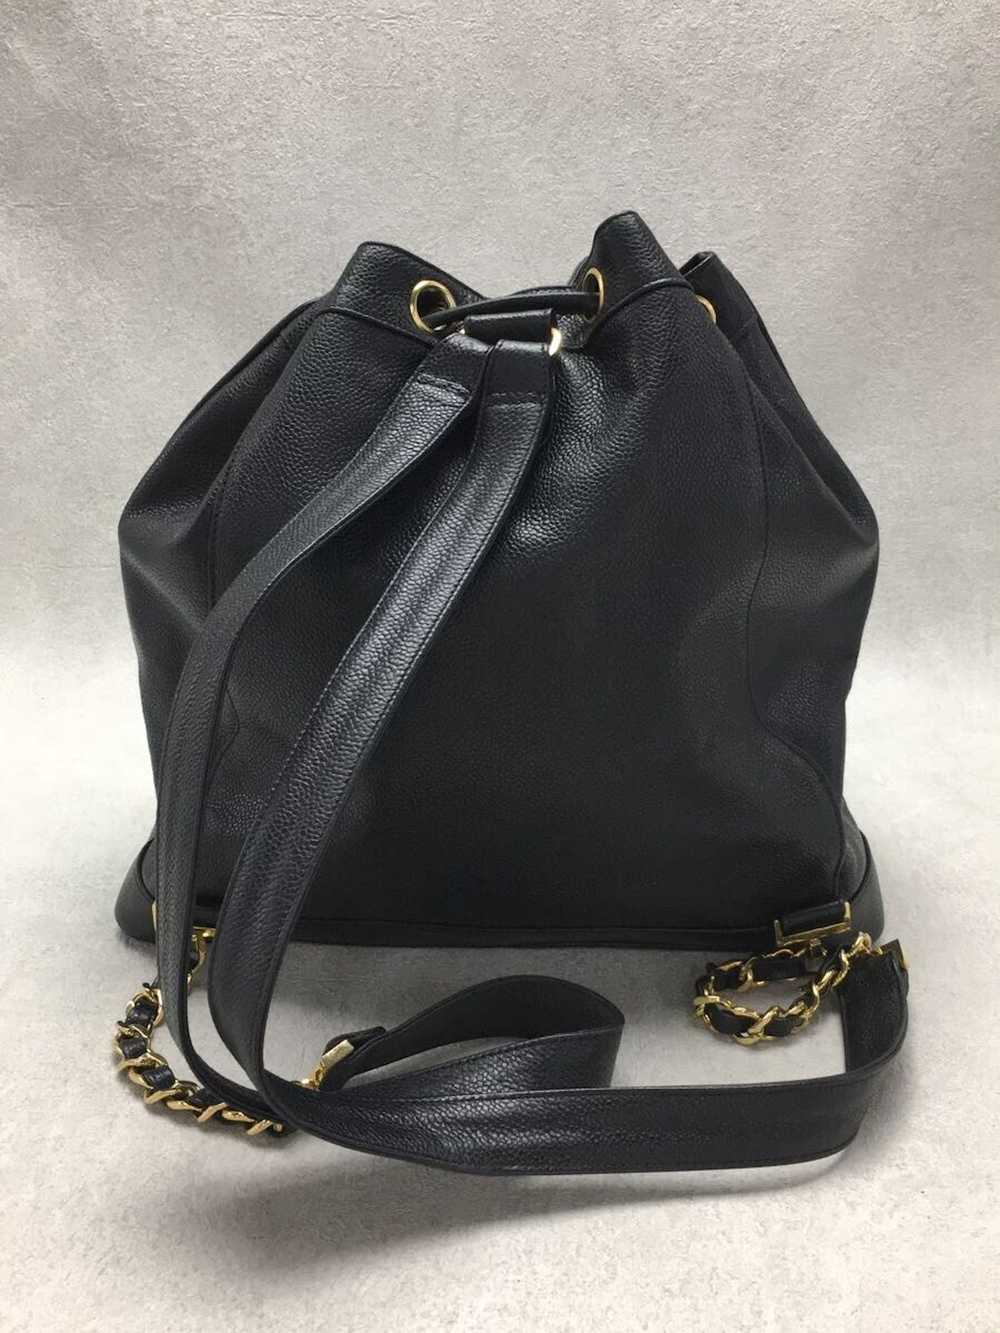 Chanel Chanel Leather Pouch Caviar Skin Backpack - image 4